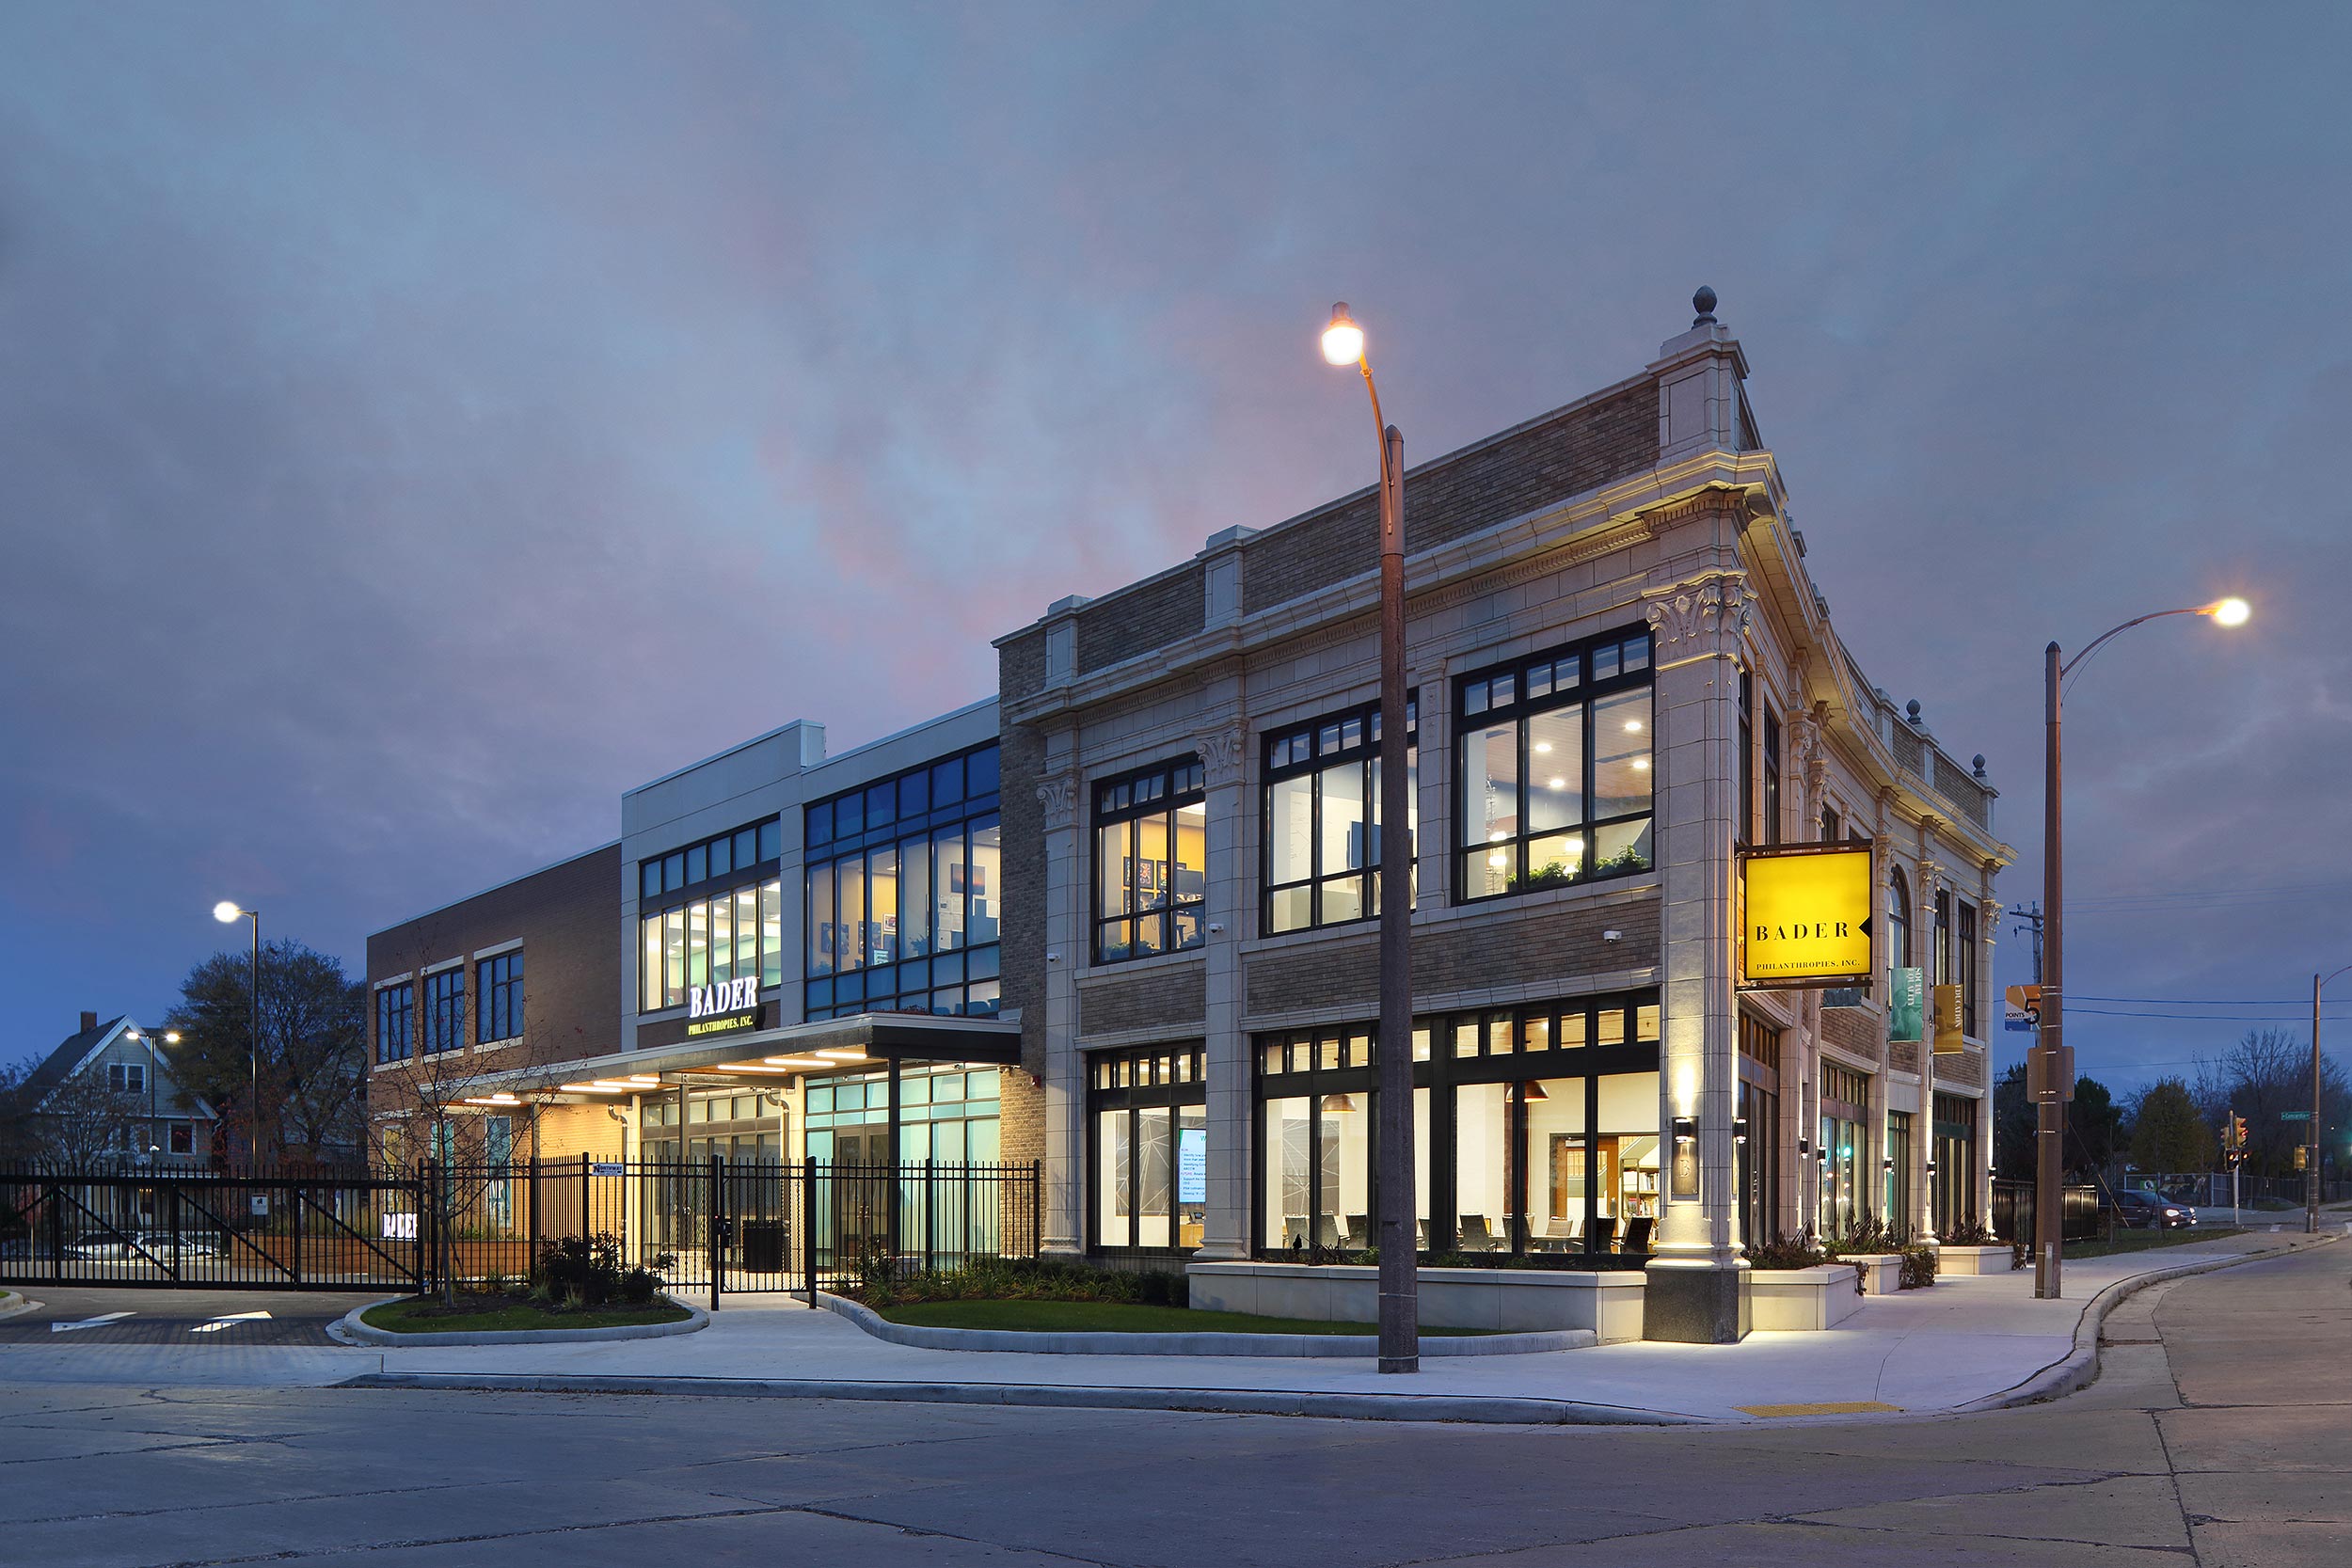 Commercial exterior photograph at dusk